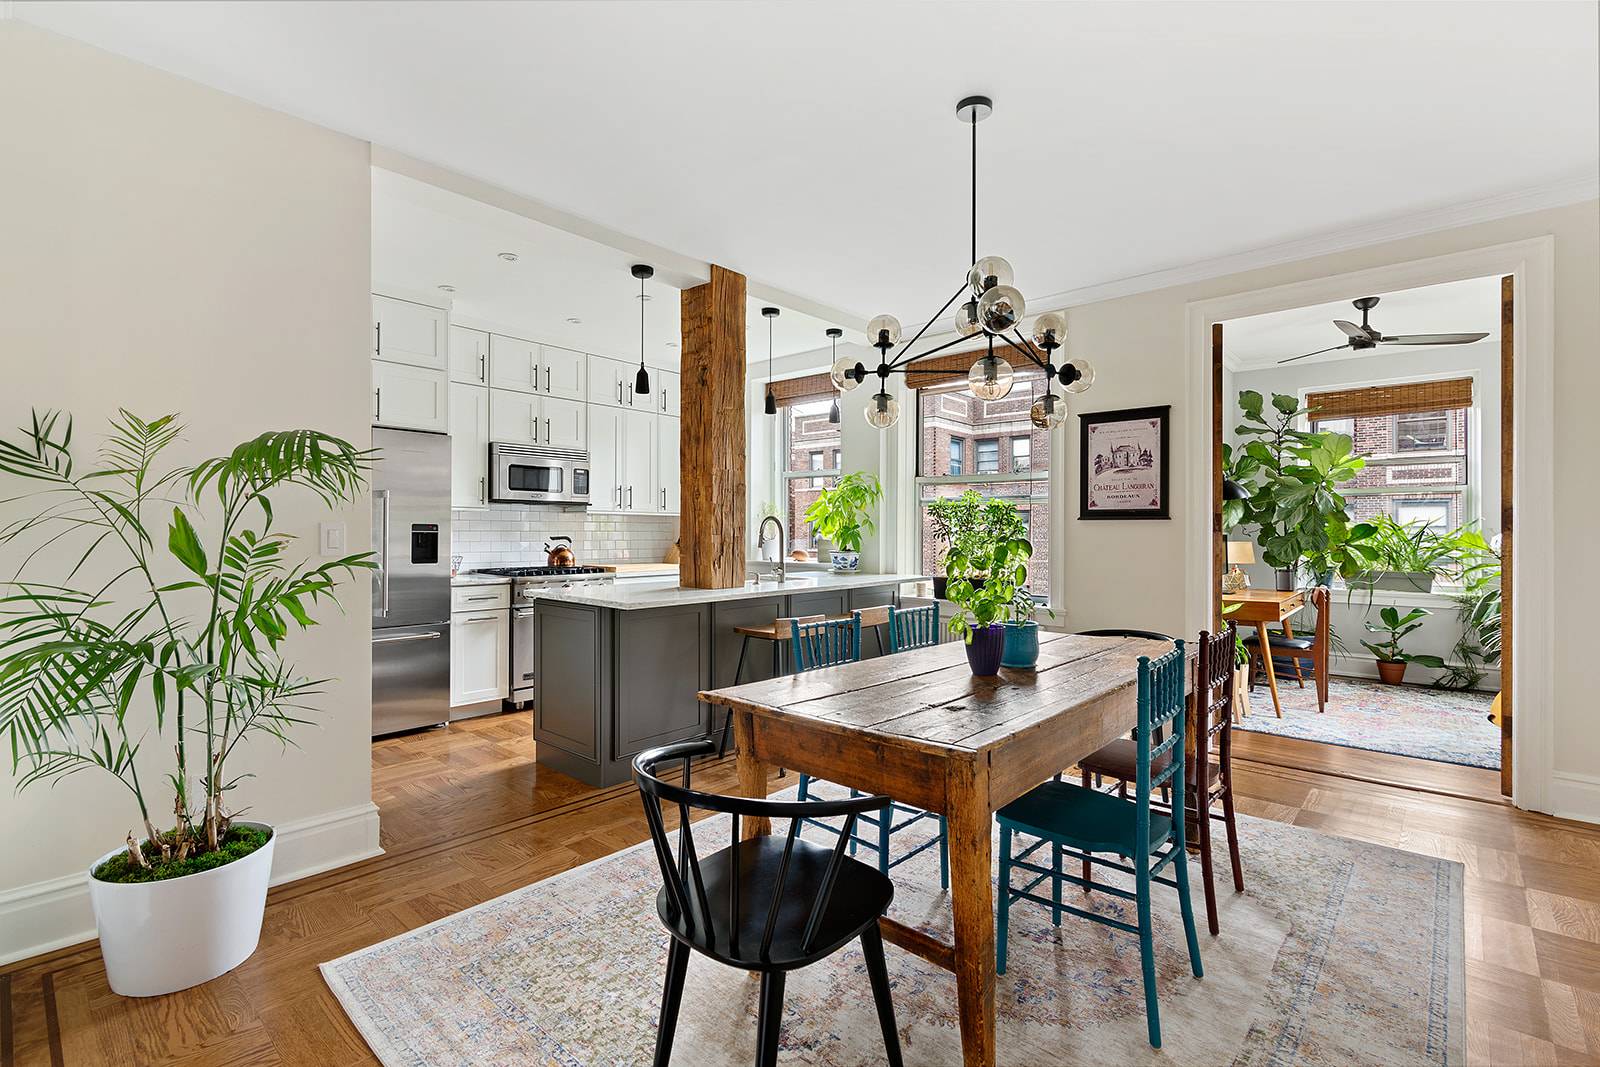 Spectacular, rarely seen, 2 Bedroom coop with a sunroom that easily converts to an office or den is available in the prewar Laburnum Court in Jackson Heights.